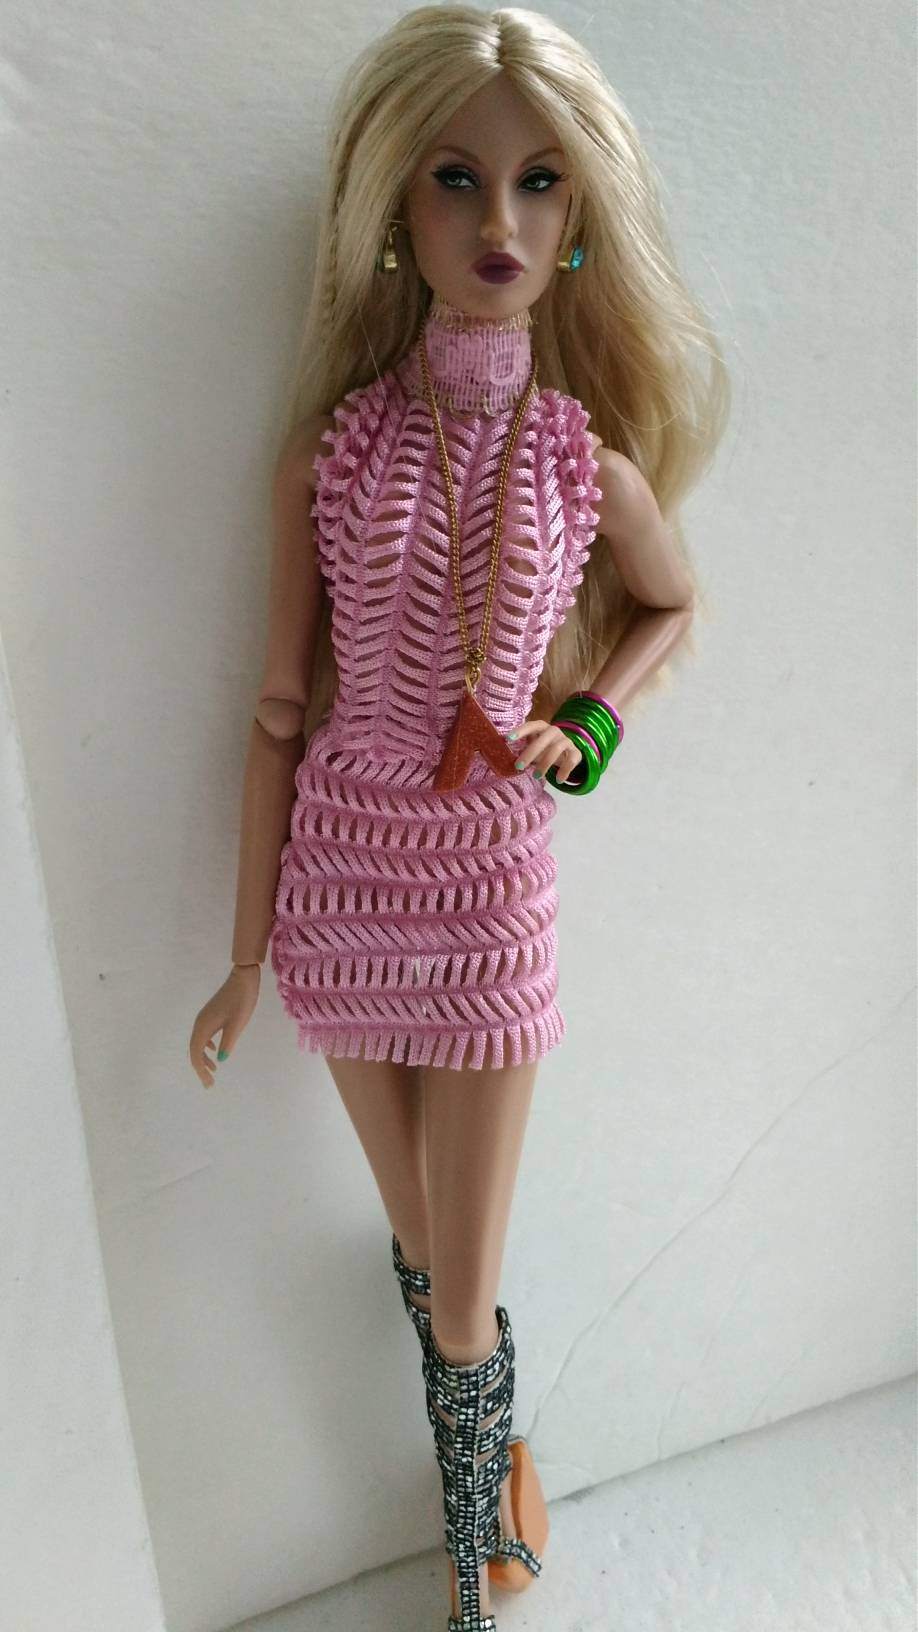 12 Inch Fashion Doll Dress is One Size Fits All Dolls Barbie | Etsy